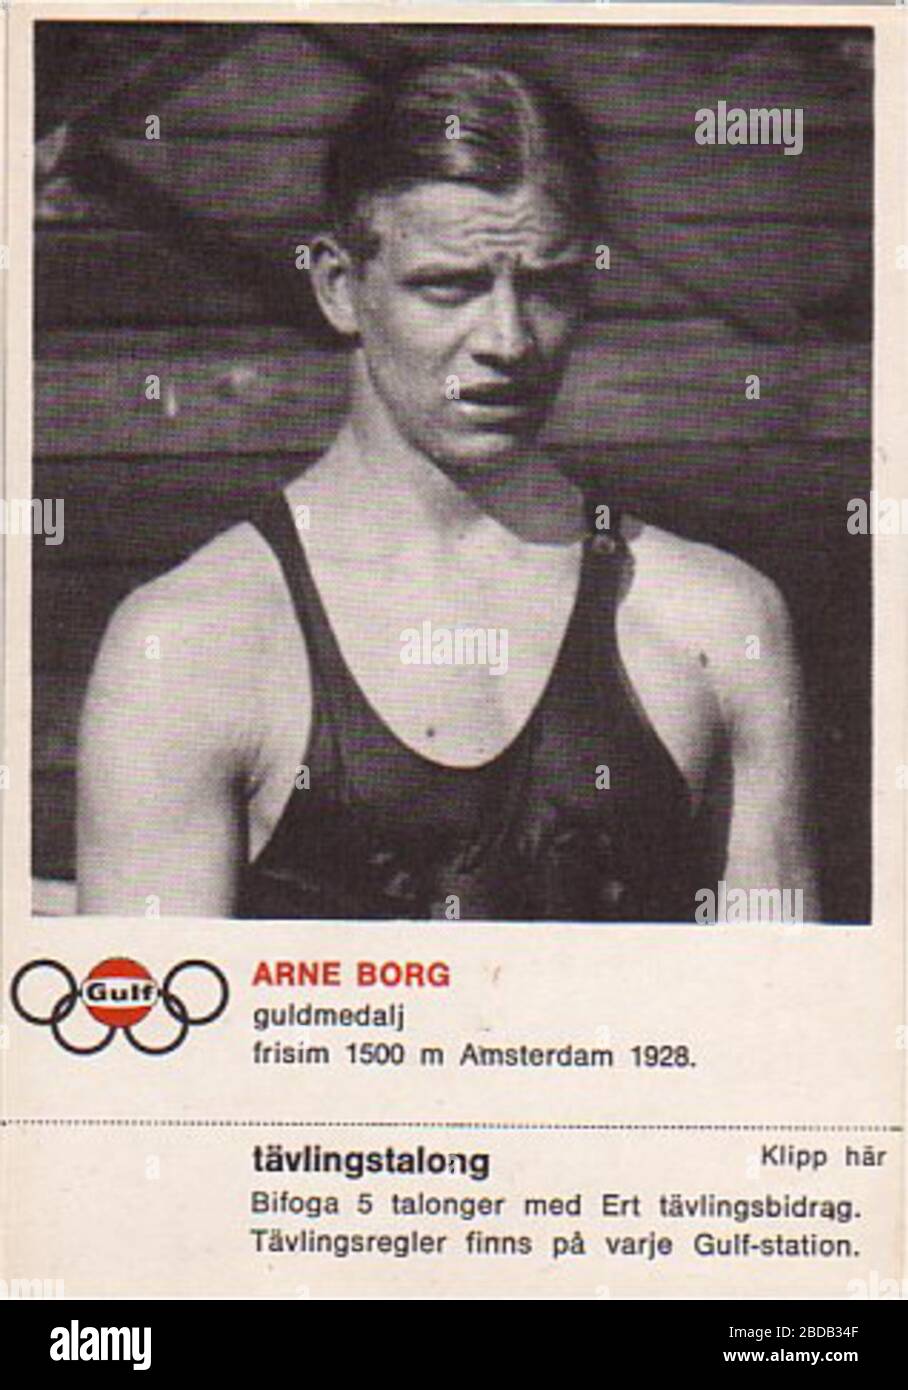 'Arne Borg; circa 1928 date QS:P,+1928-00-00T00:00:00Z/9,P1480,Q5727902 (published in Sweden in 1960); http://www.sigbert.se/sam1/gulf s.htm; Unknown author; ' Stock Photo